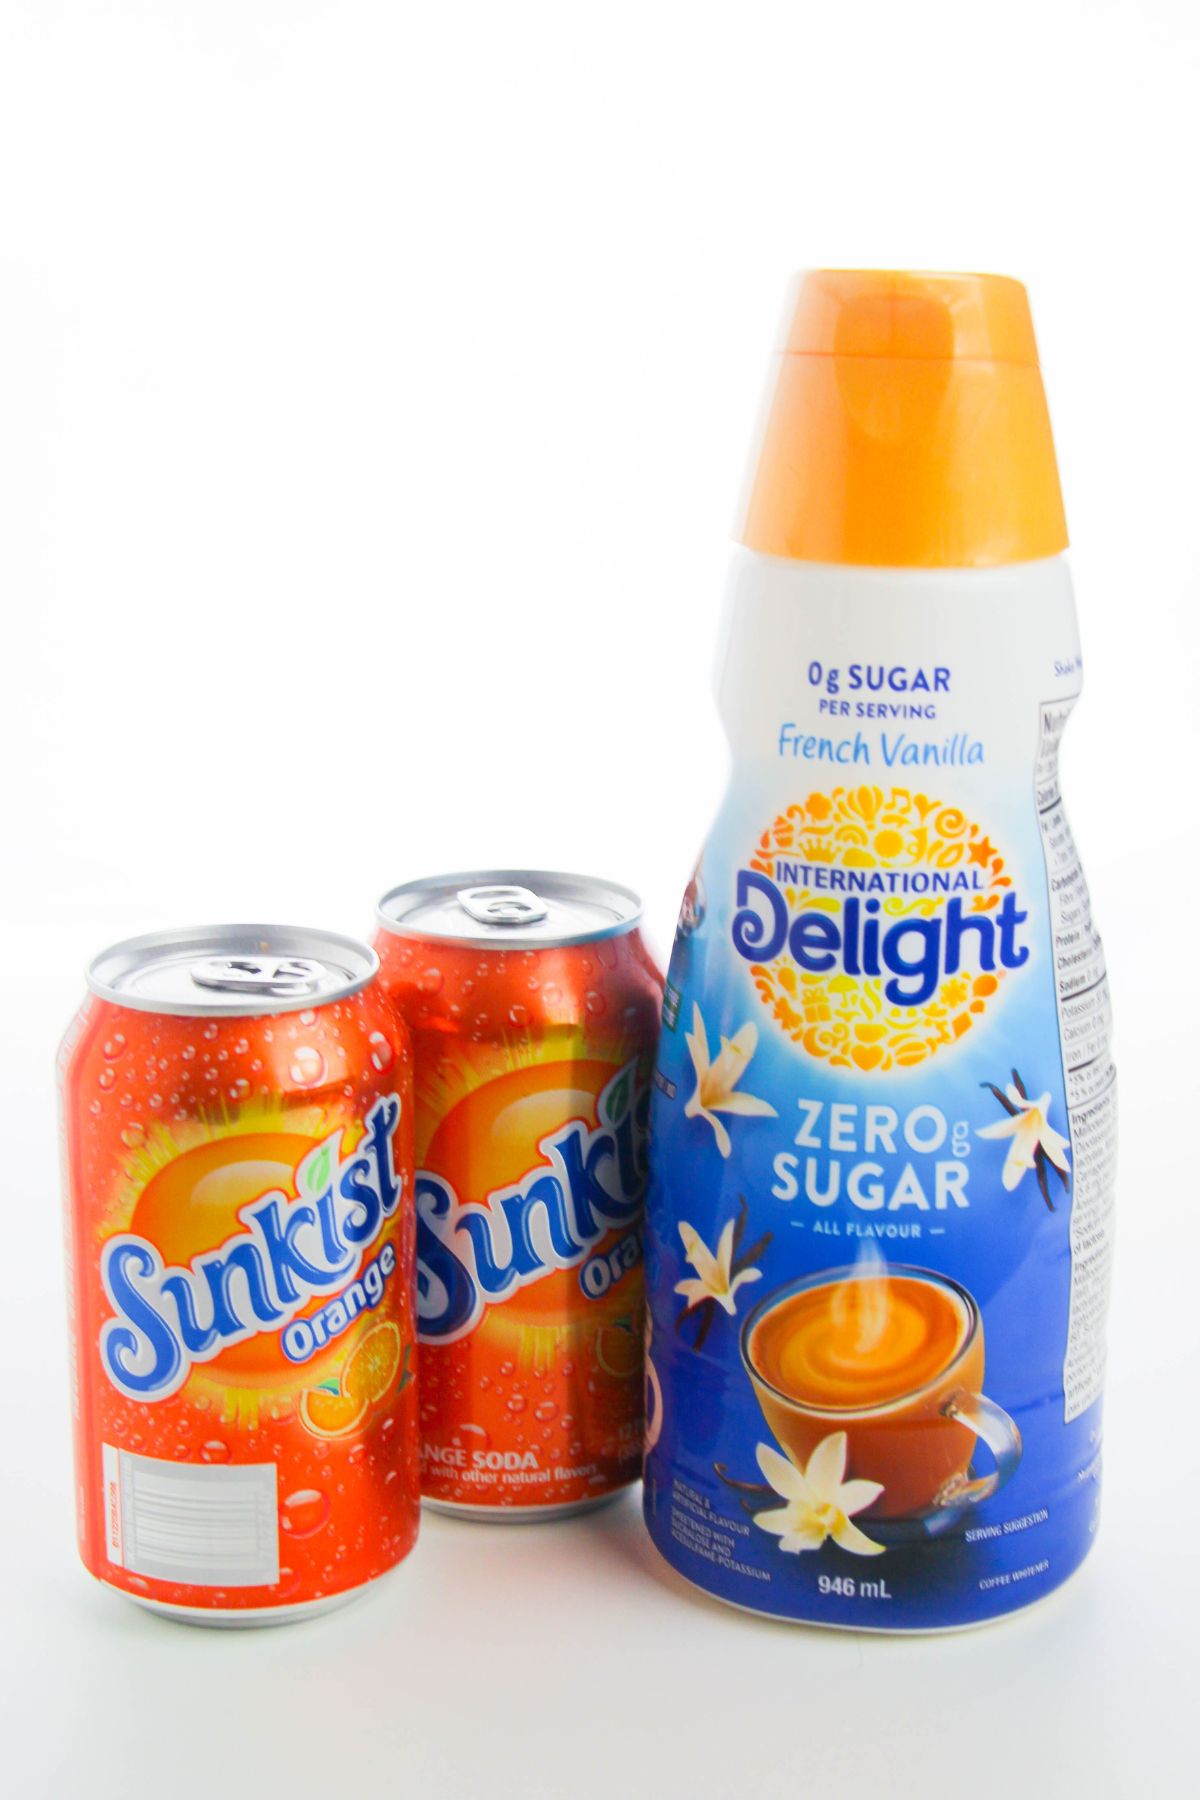 two Sunkist soda cans and a container of French Vanilla creamer